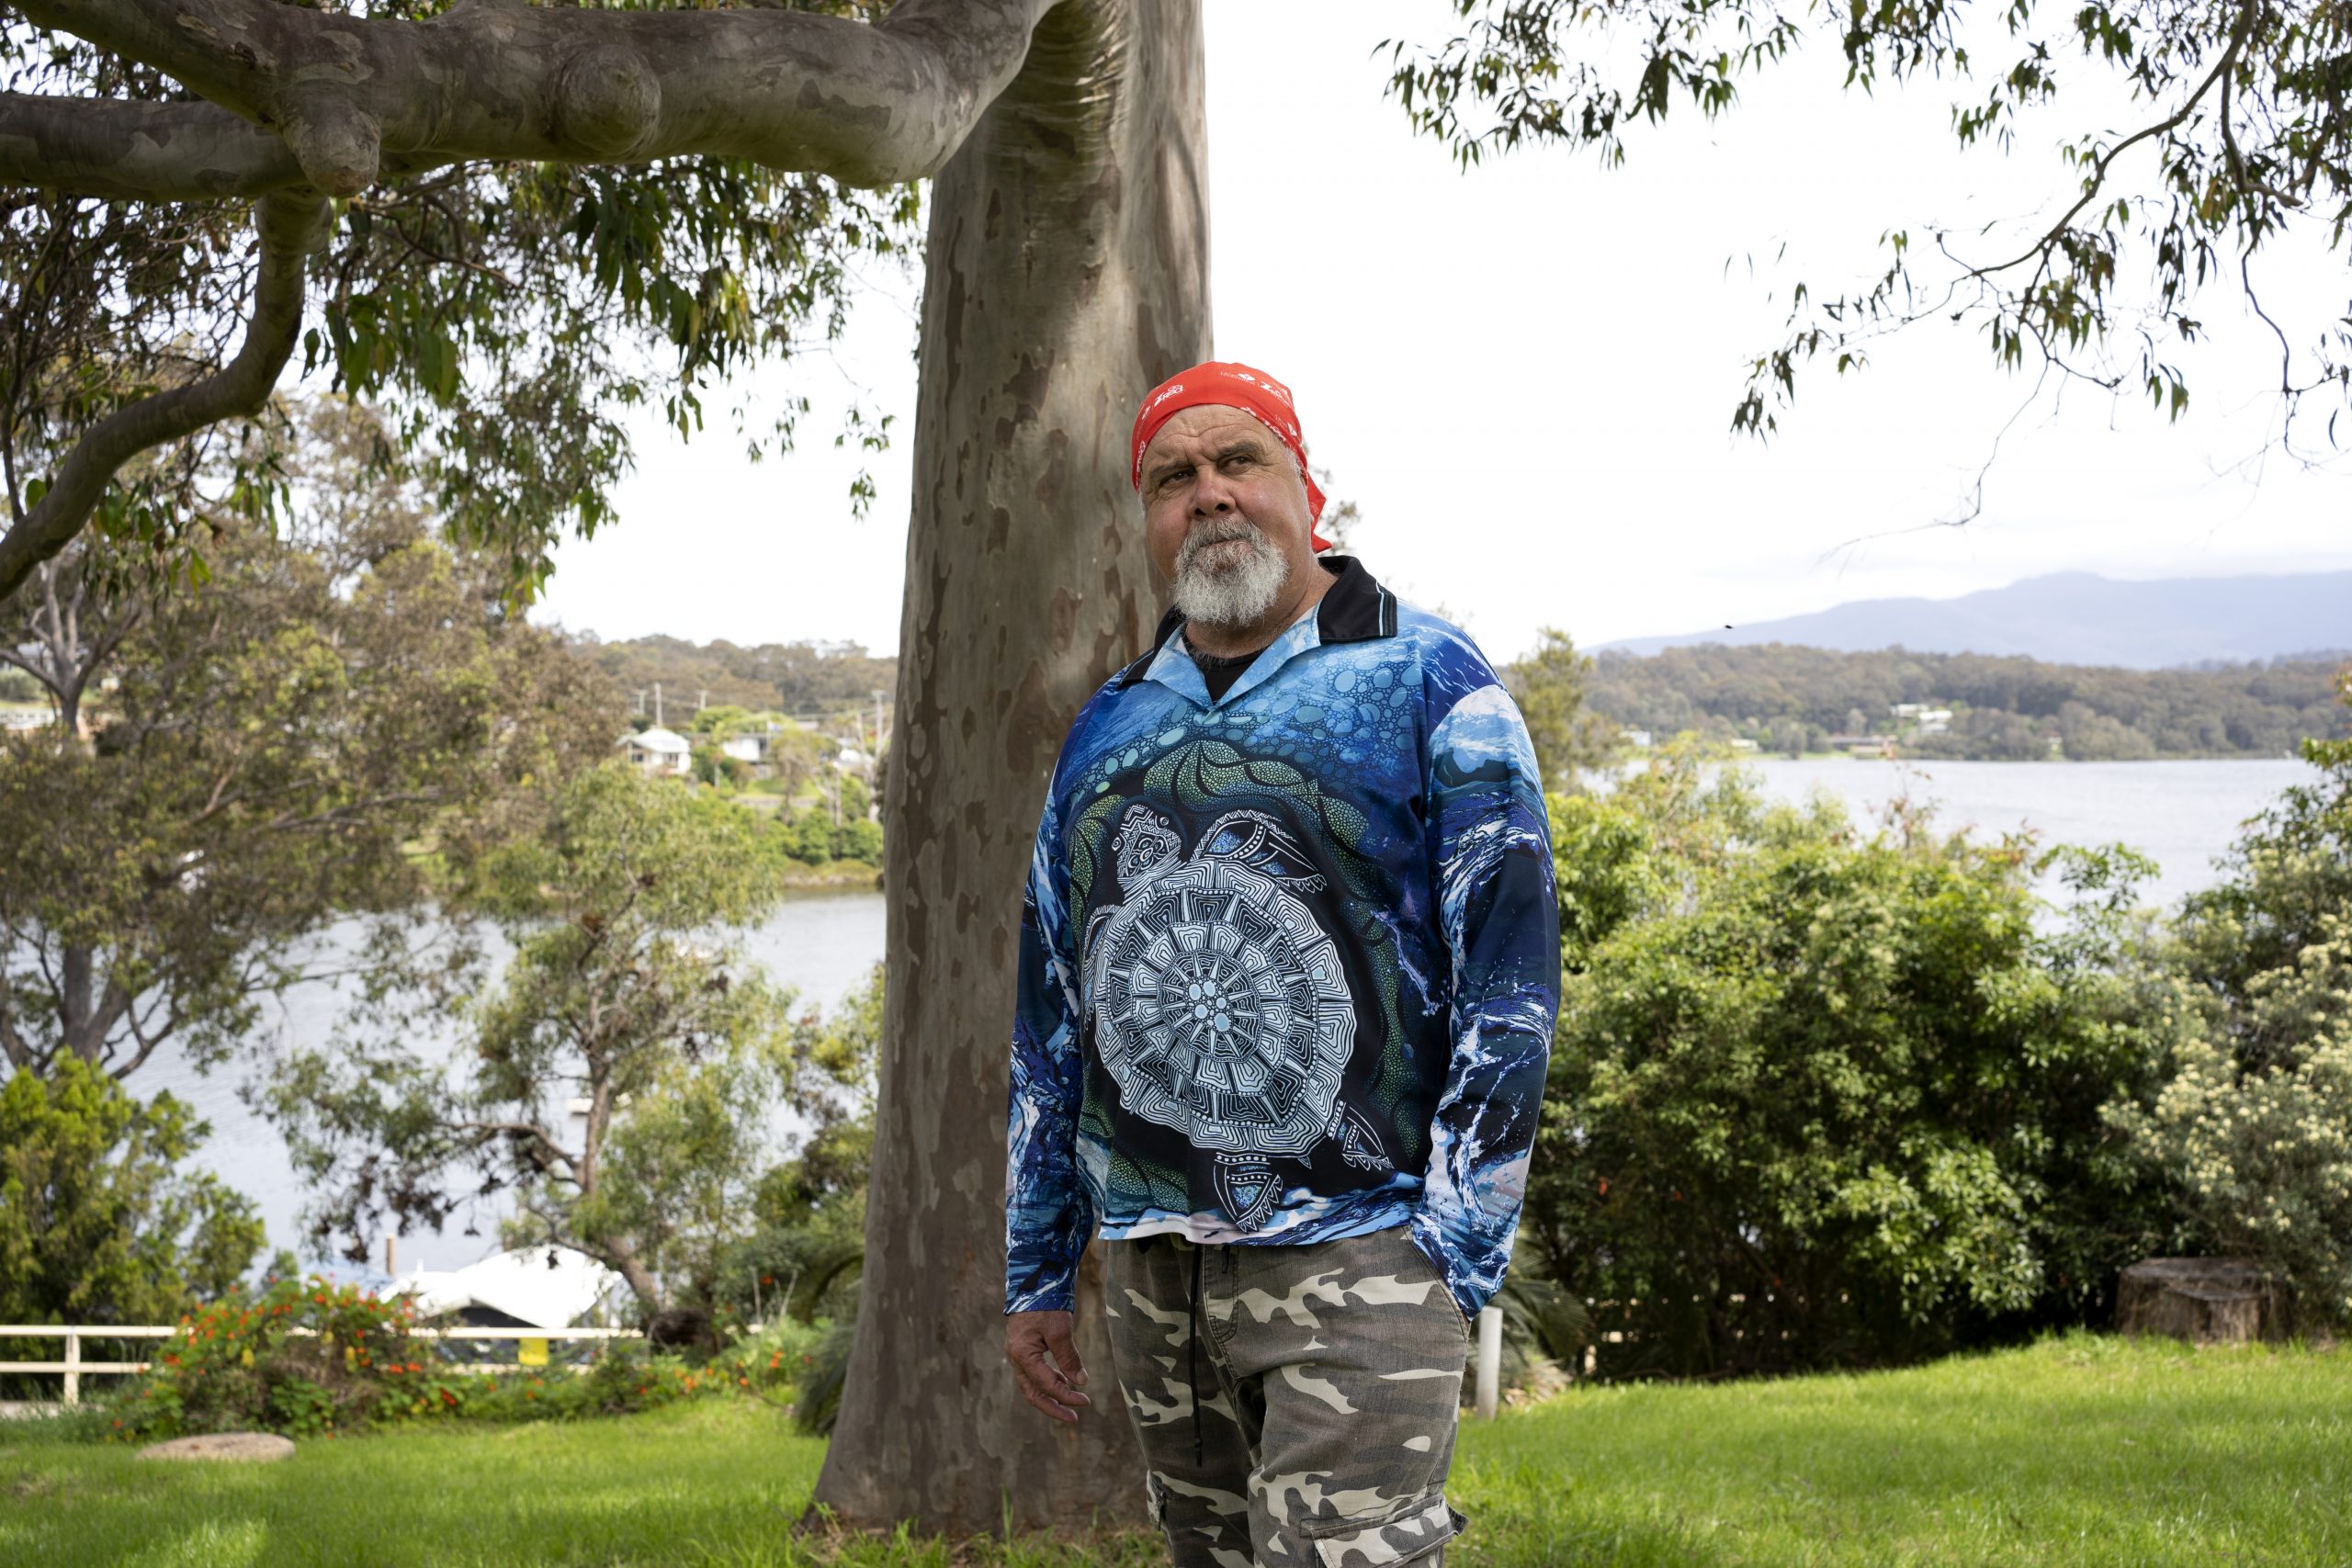 New South Wales, Australia: Wally, a Walbunja man and an applicant of the South Coast native title claim, shares his story about the impacts of fisheries regulations on his community. Photo: Aimee Han/Oxfam.